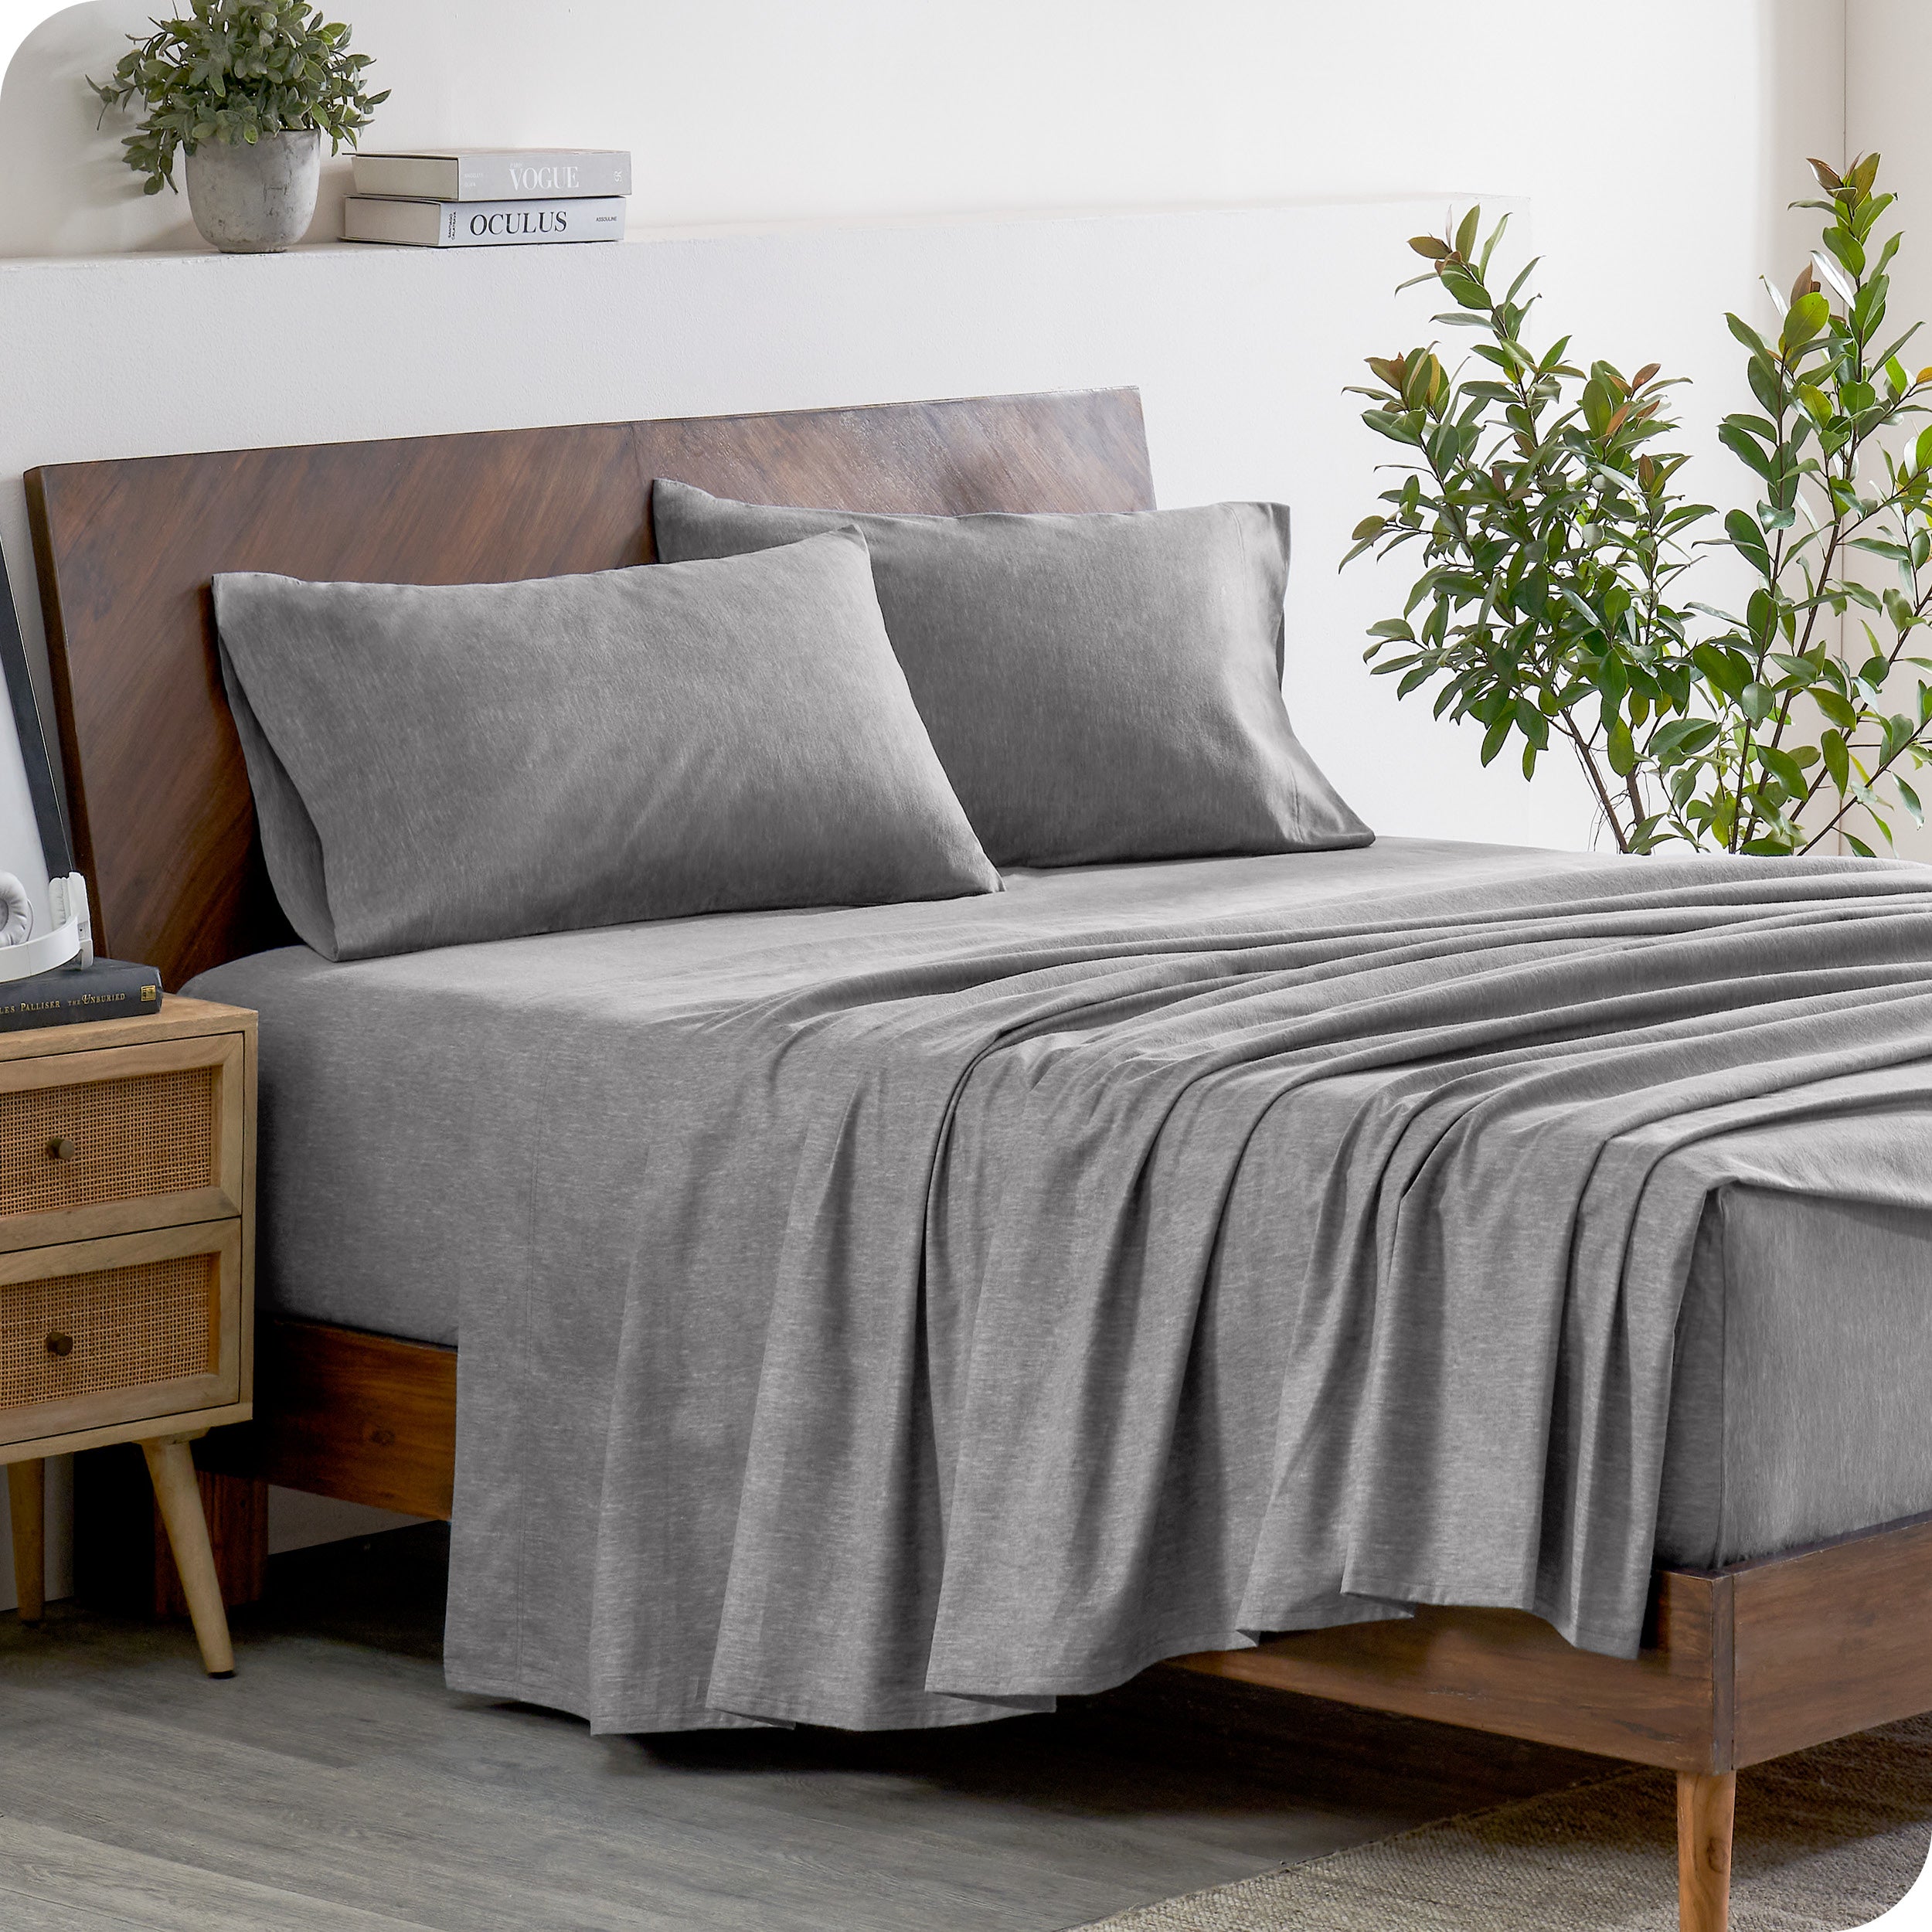 A sideview of a modern bed with a flannel sheet set.